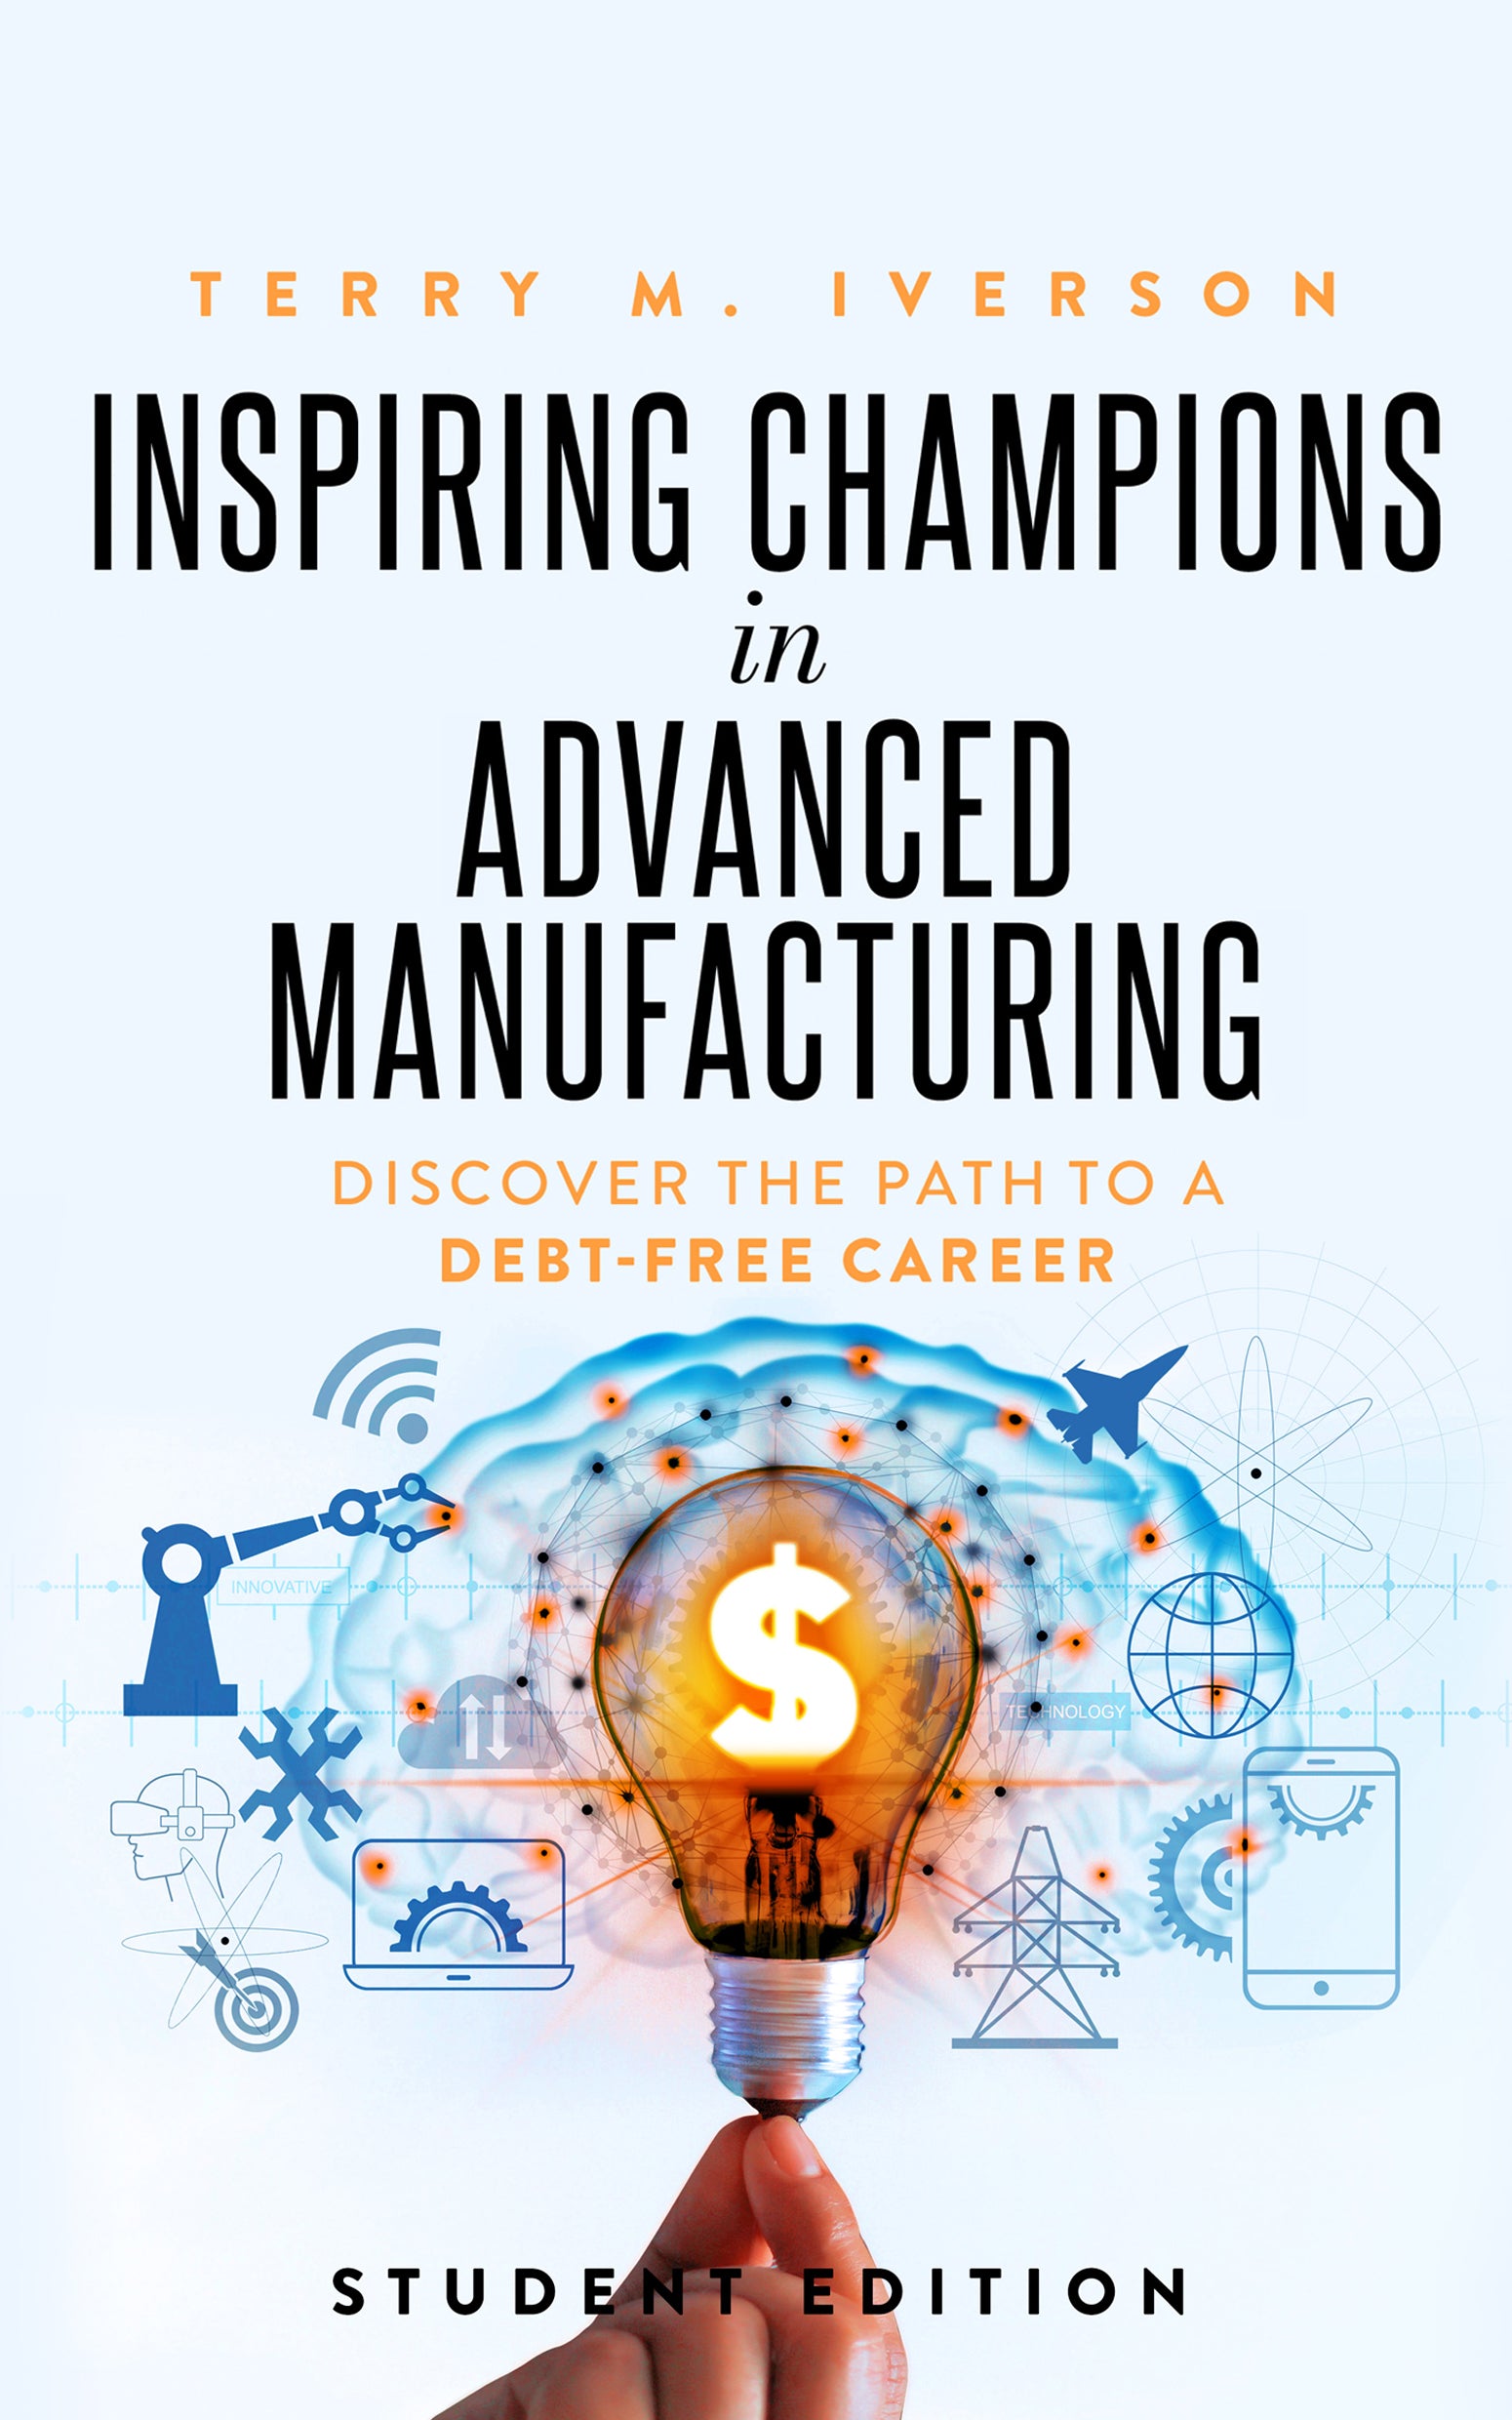 Inspiring Champions in Advanced Manufacturing: Student Edition